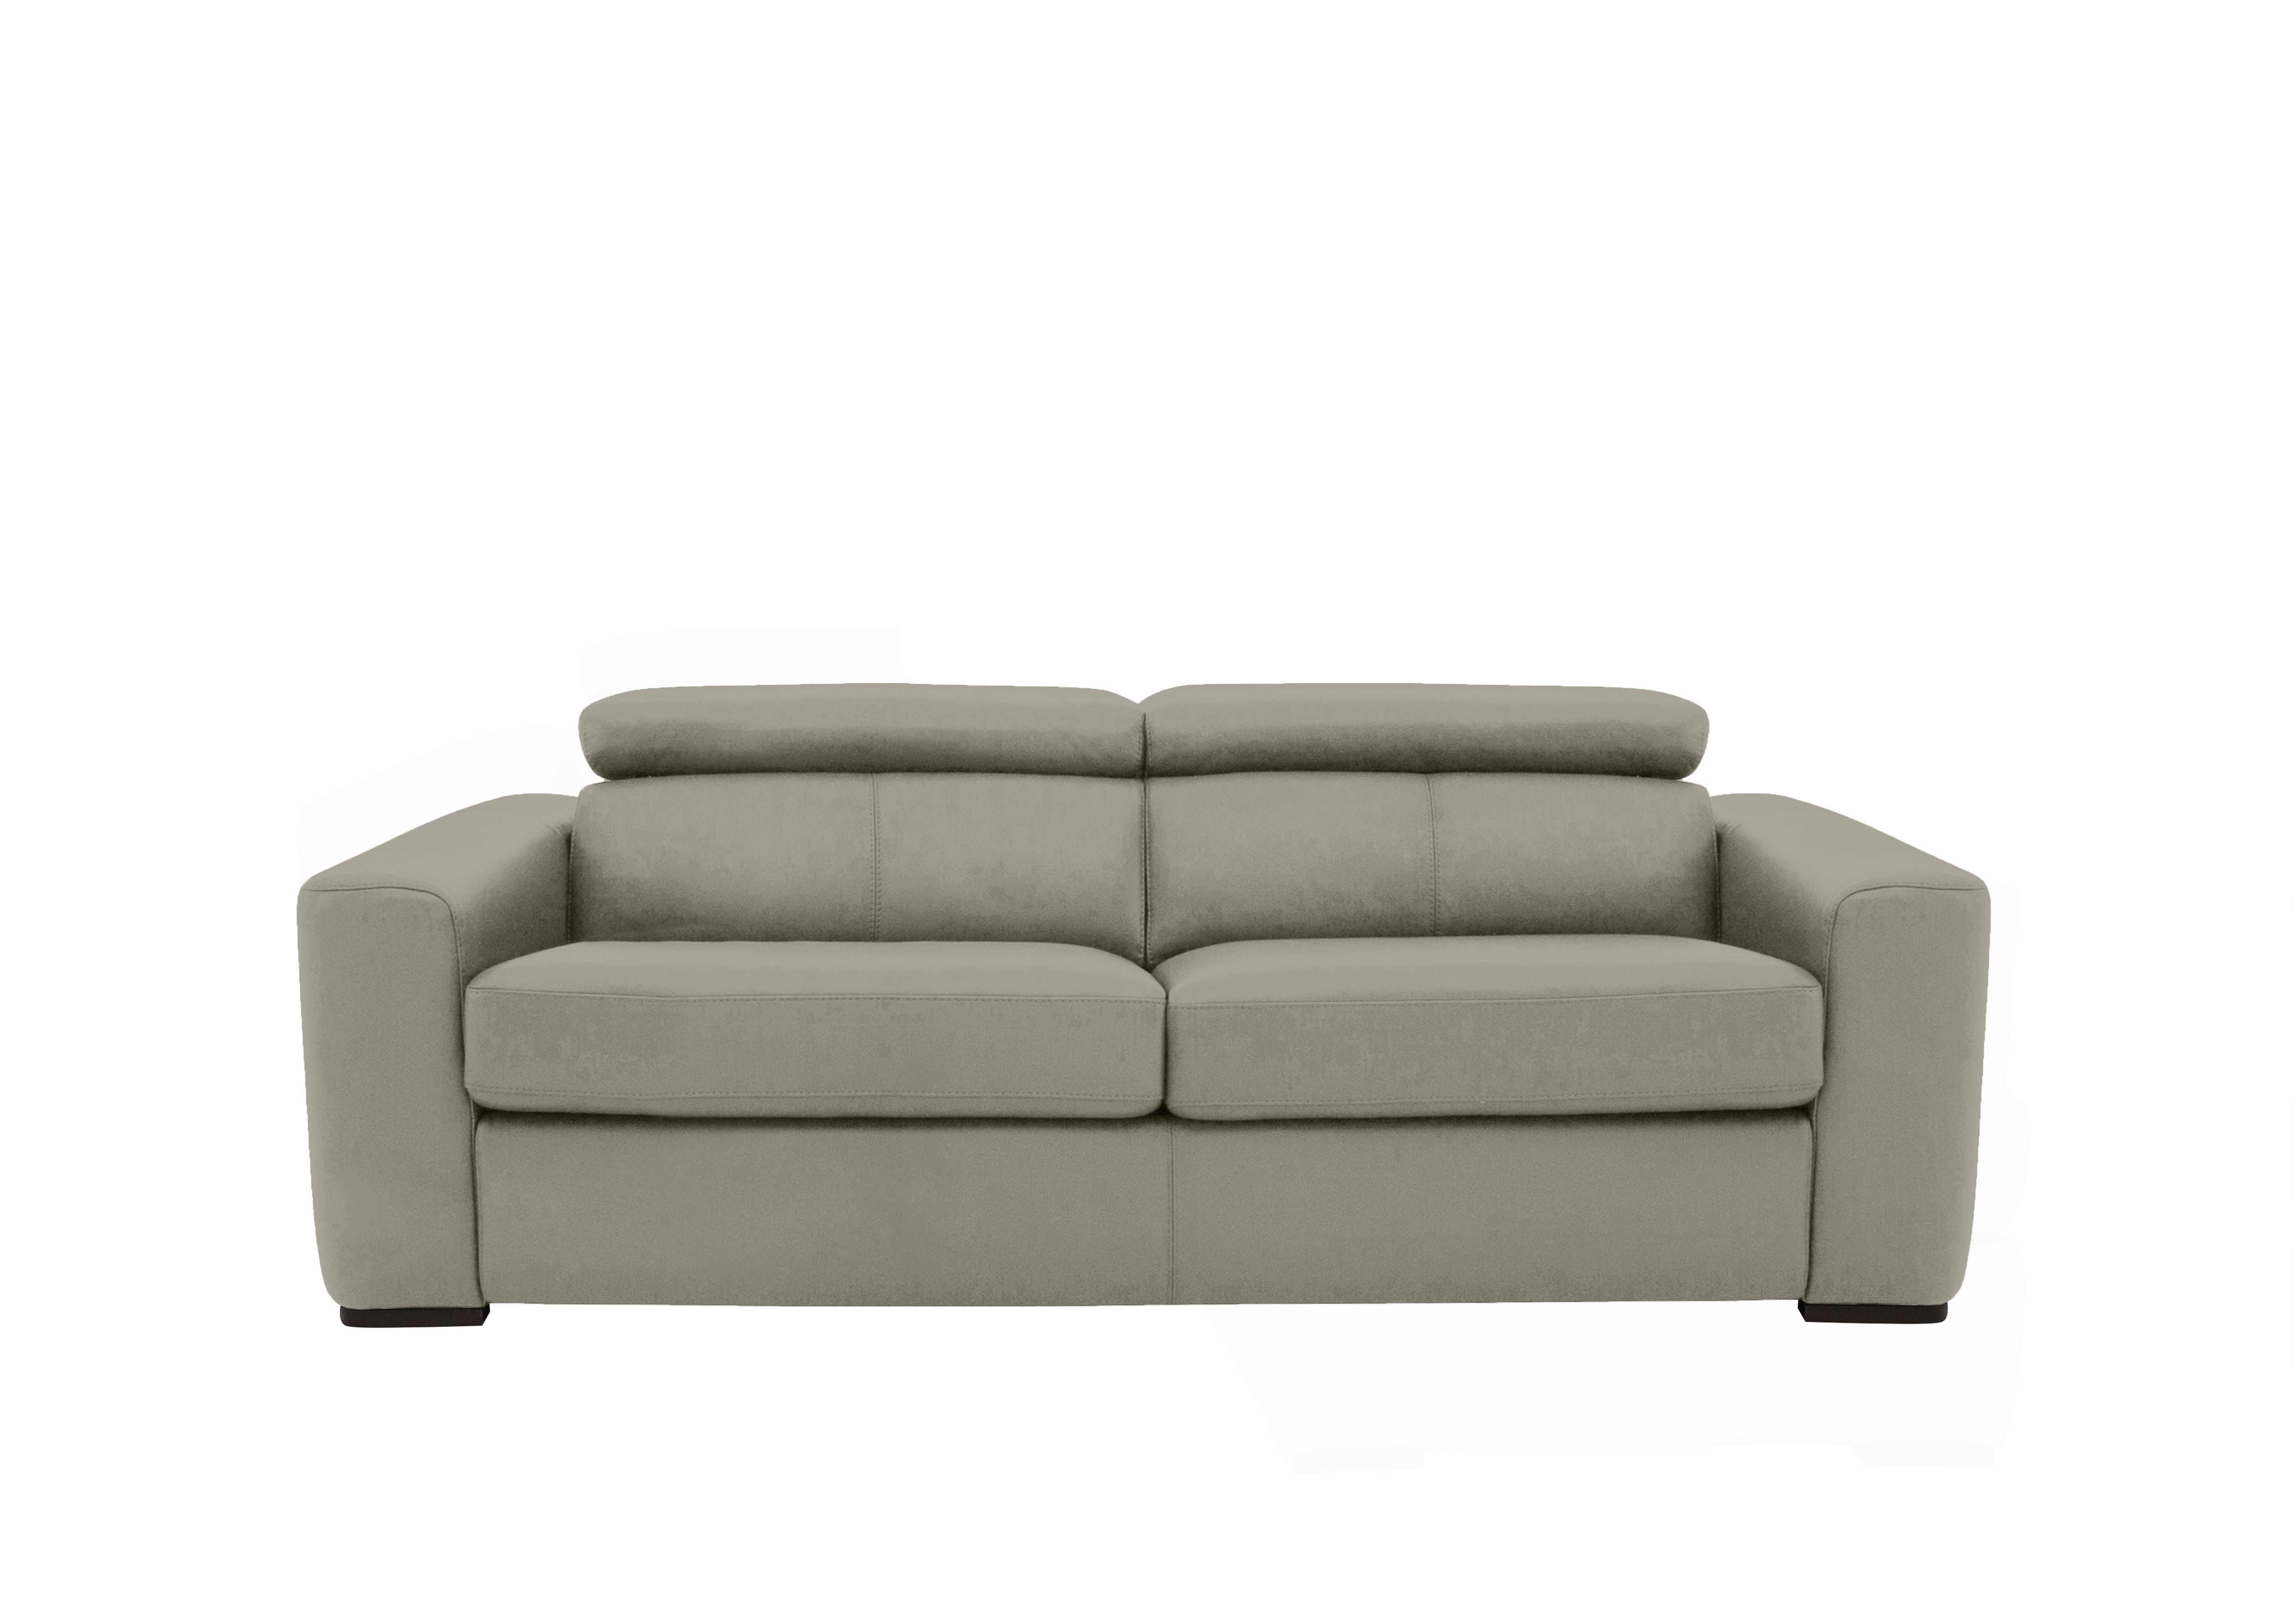 Infinity 3 Seater Leather Sofa Bed in Bv-946b Silver Grey on Furniture Village